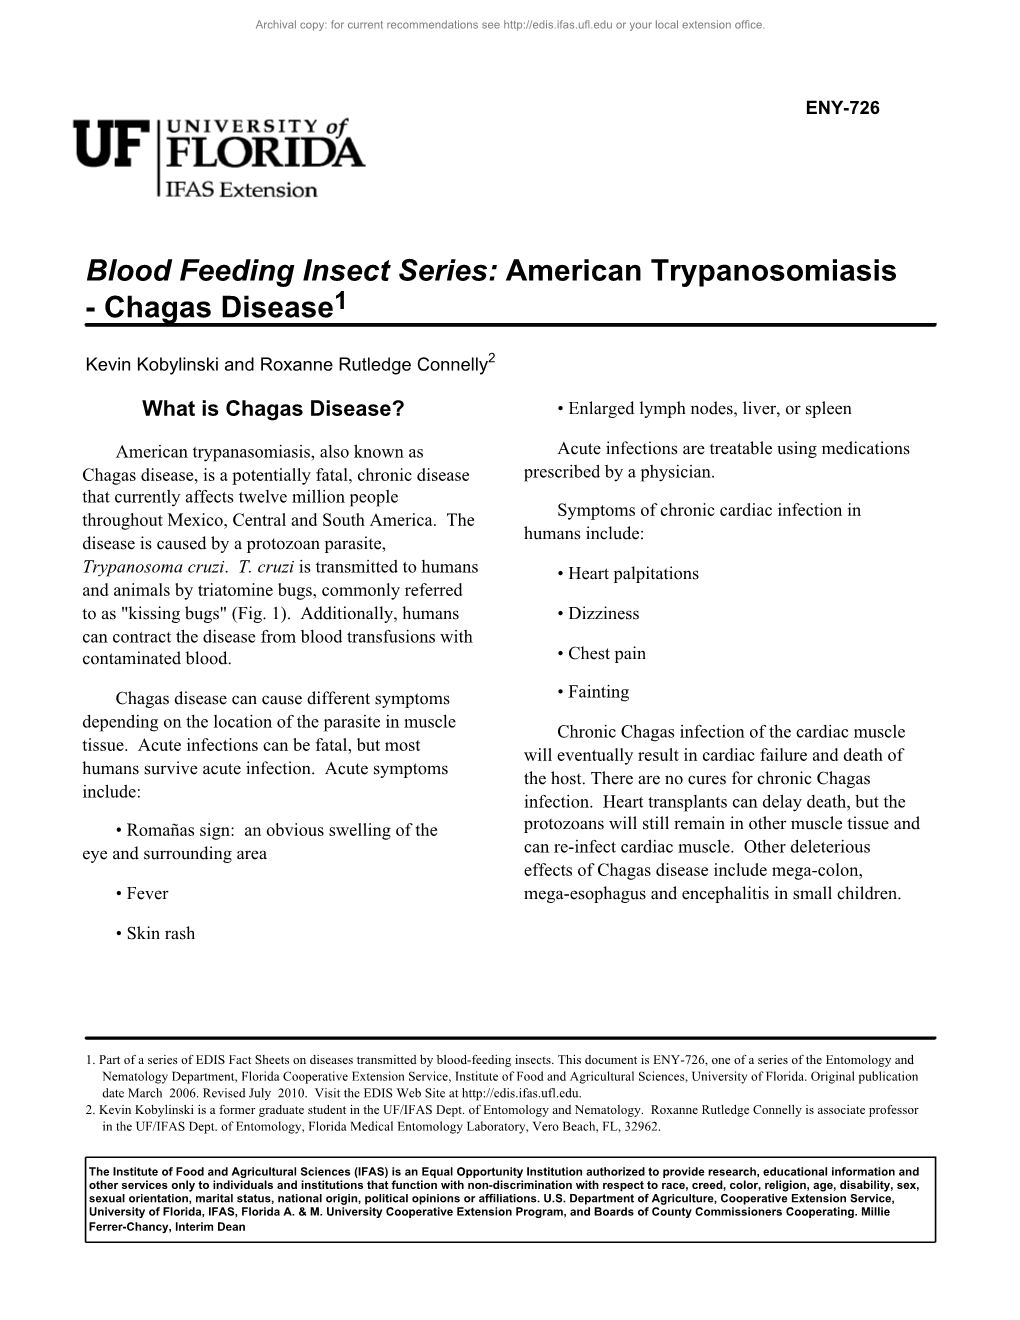 American Trypanosomiasis - Chagas Disease1